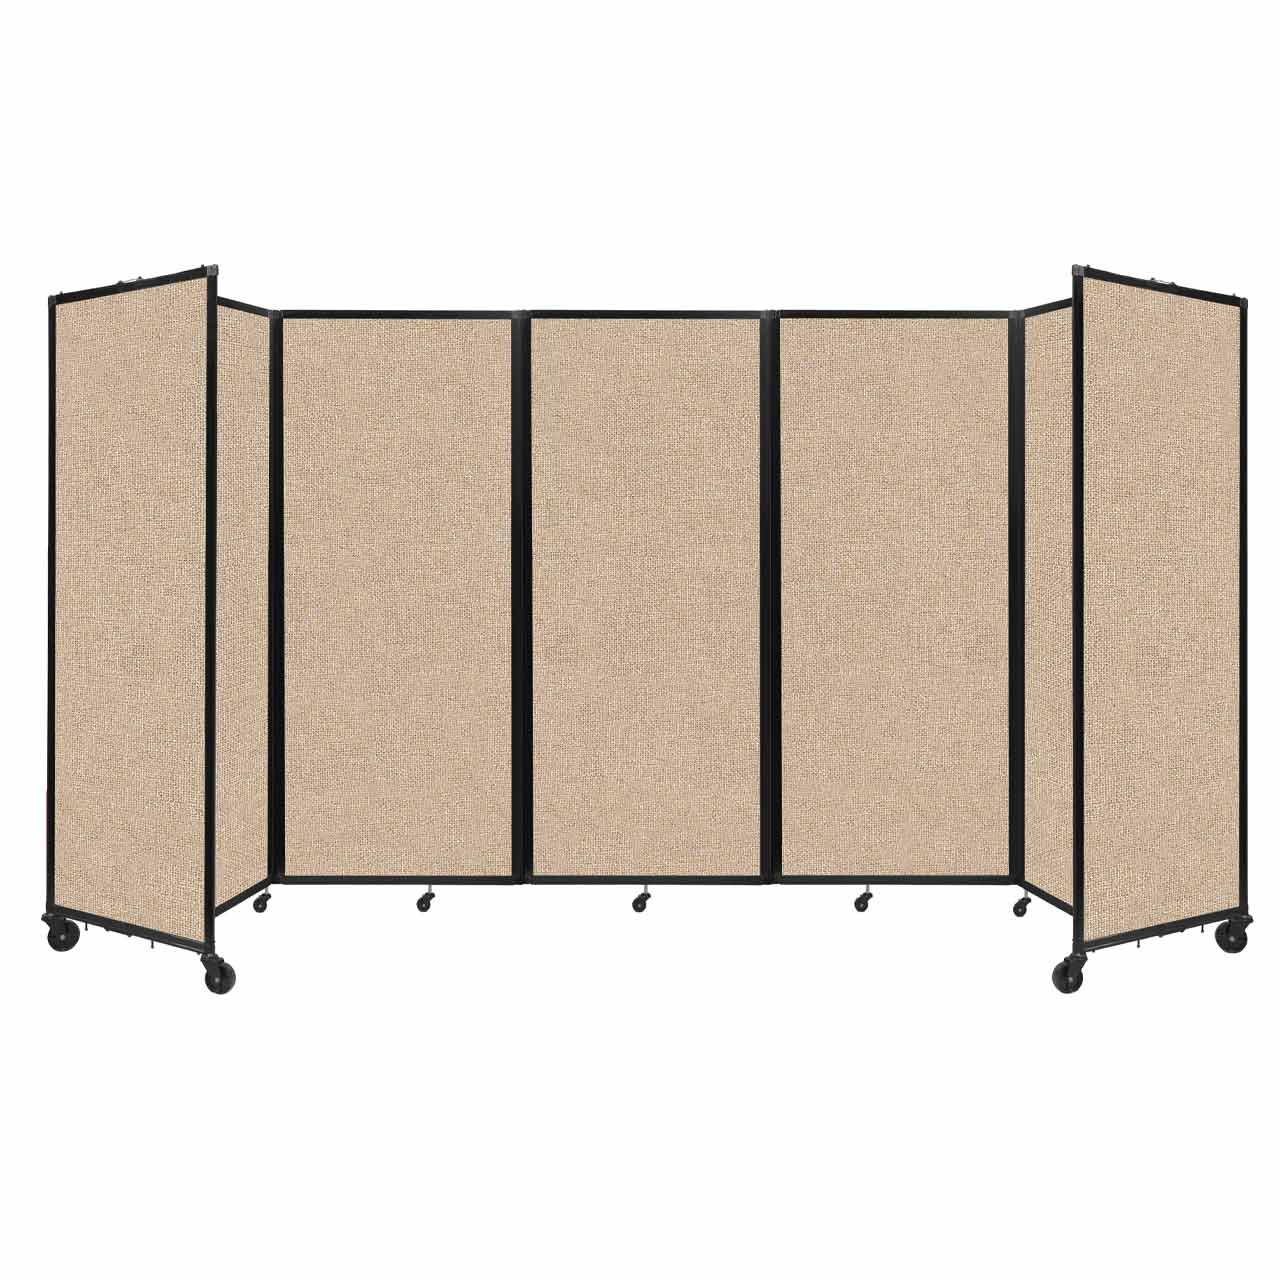 Room Divider 360° Folding Portable Partition with Acoustical Fabric Panels, 14' W x 6' 10" H